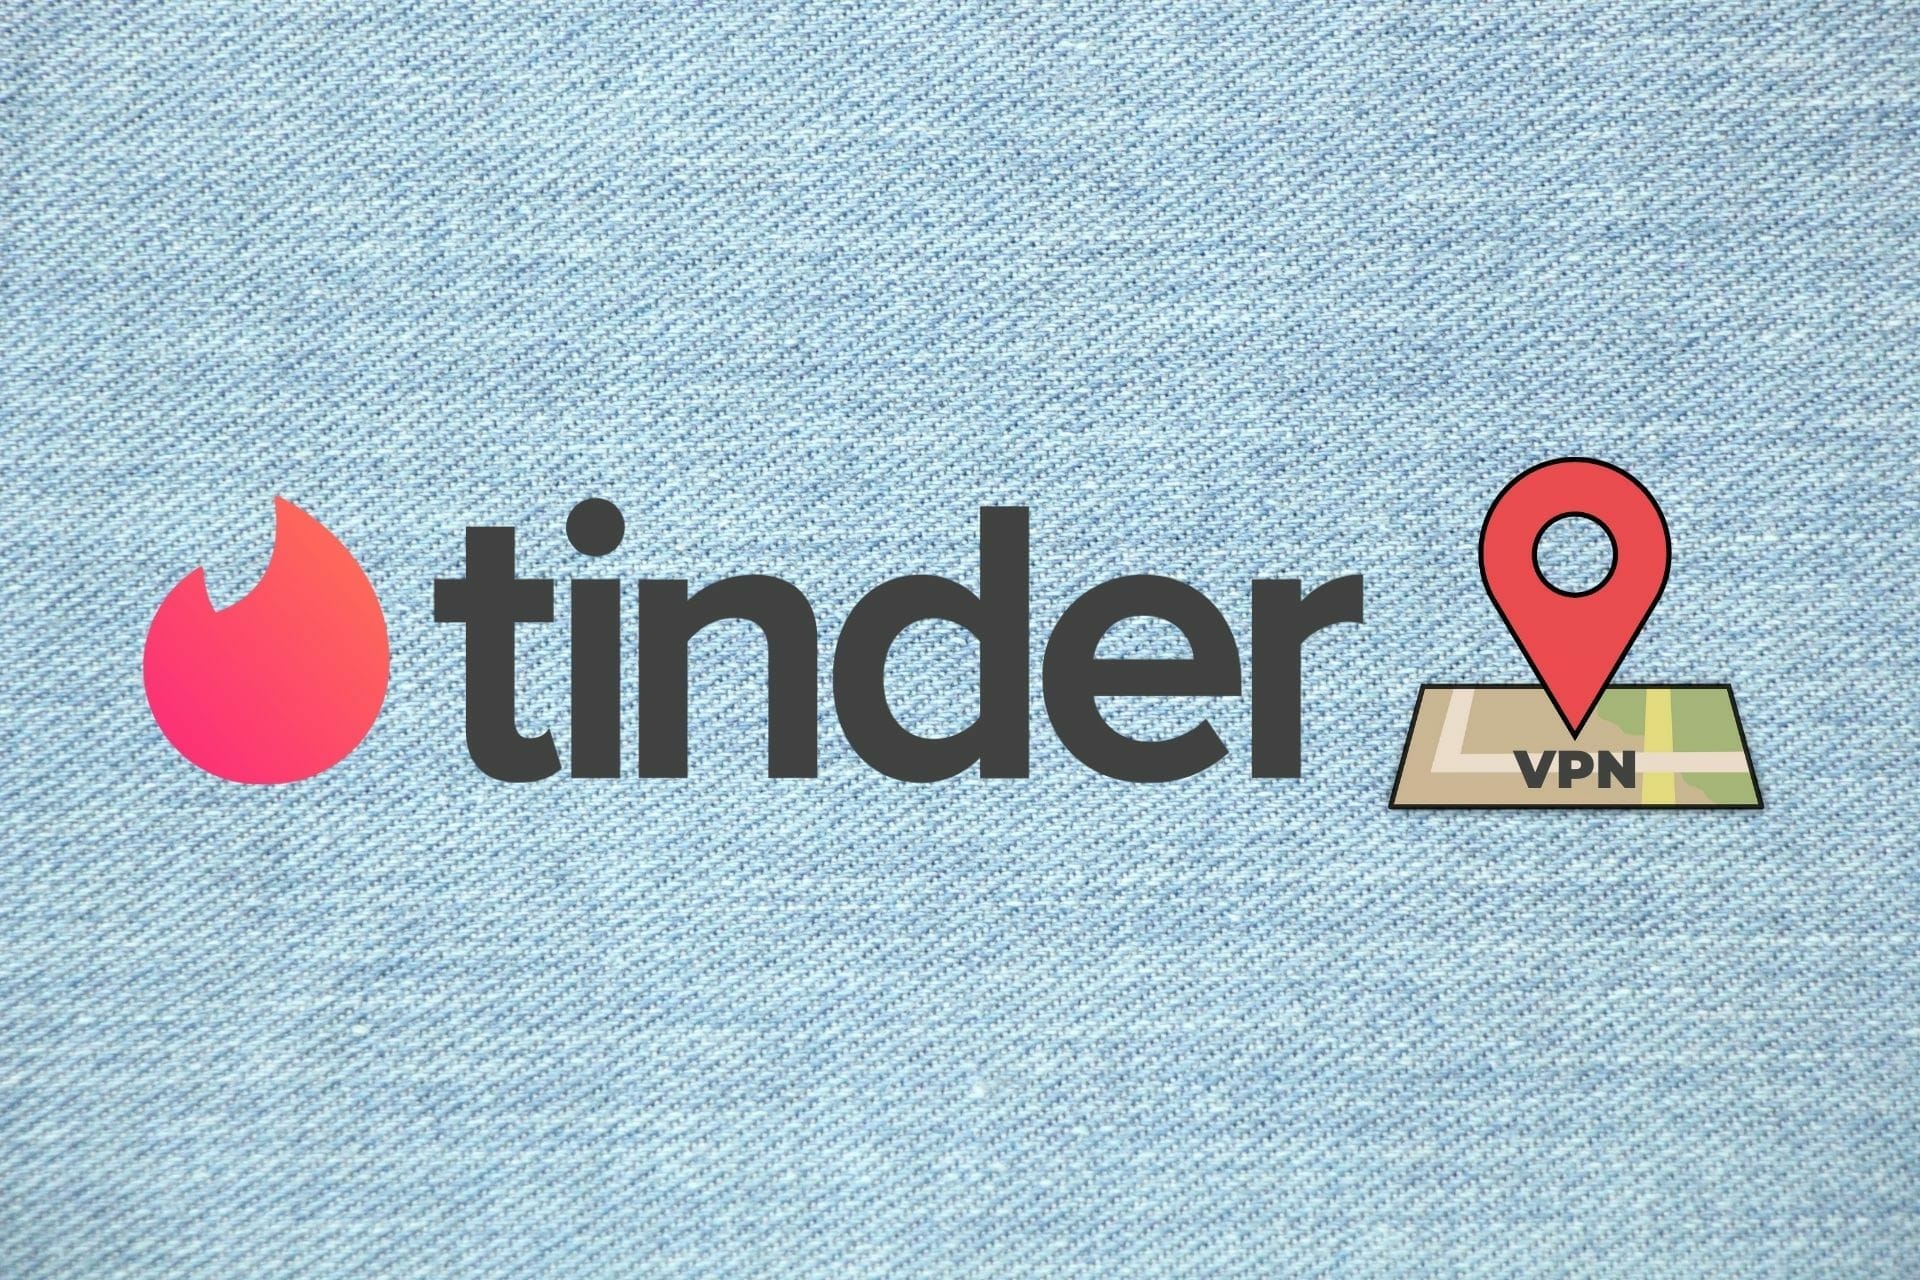 How to open tinder from another country